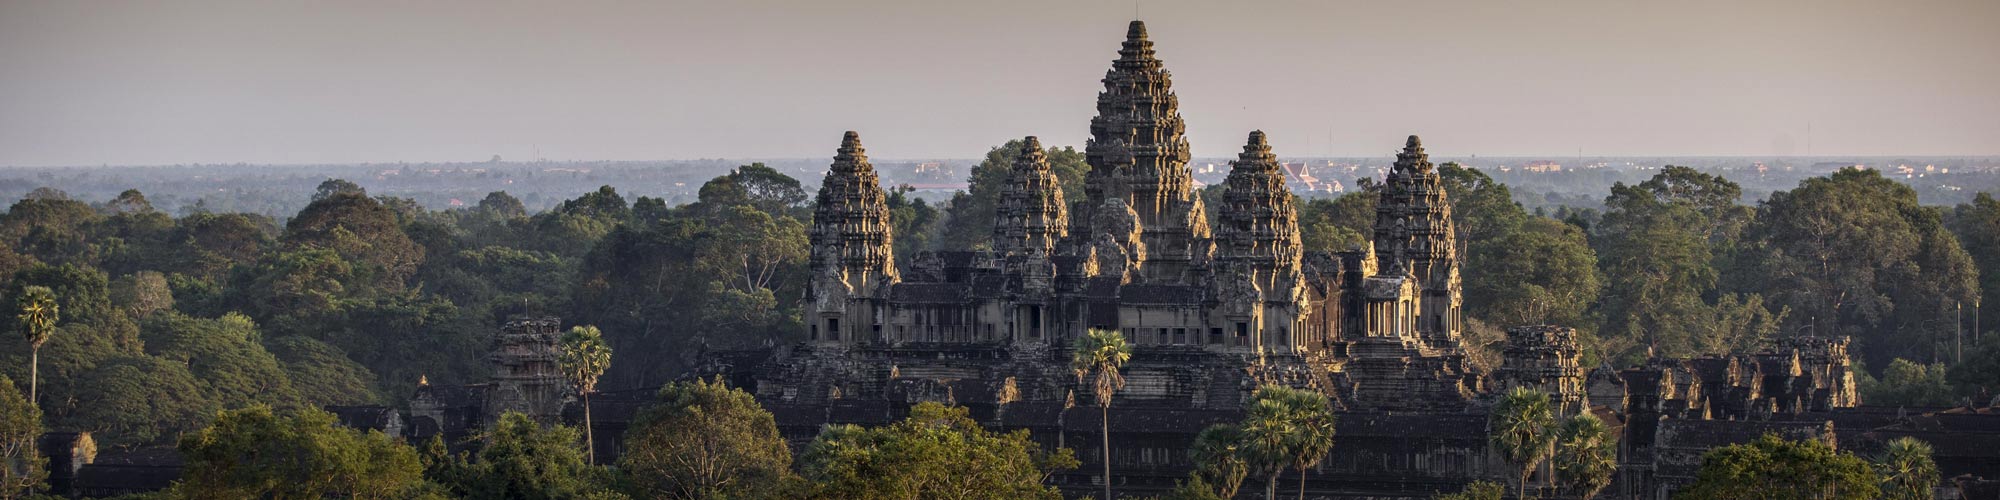 Découverte Cambodge © Wander Luster / iStock